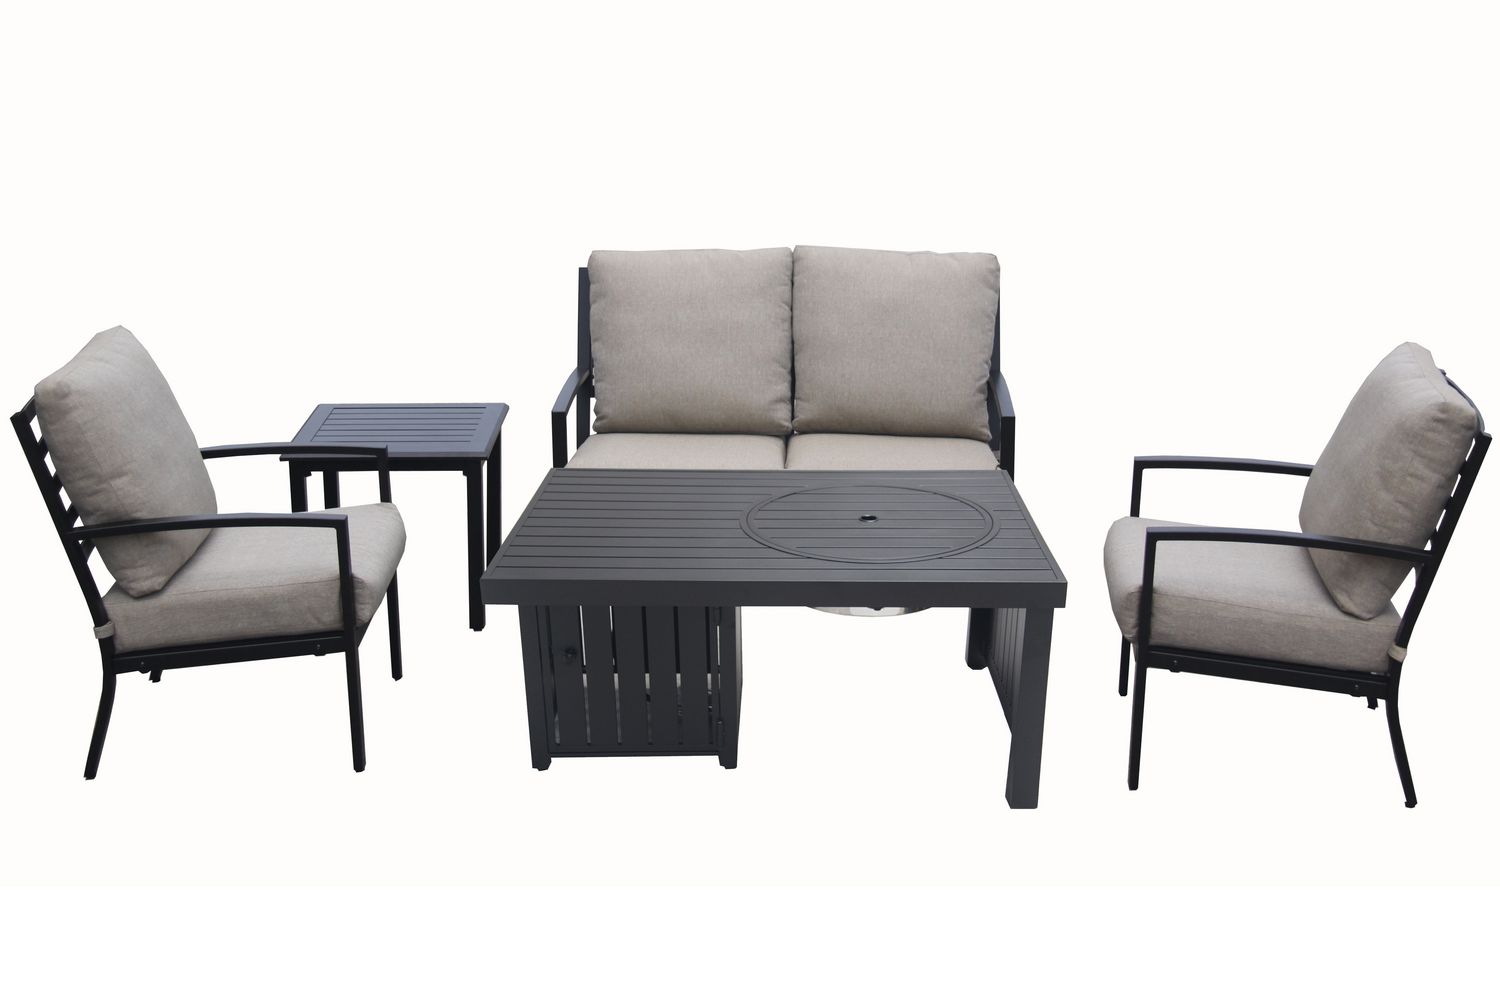 Patioflare 5 Piece Cast Aluminum Set With Fire Pit Table Canada - Patio Conversation Sets With Fire Pit Canada